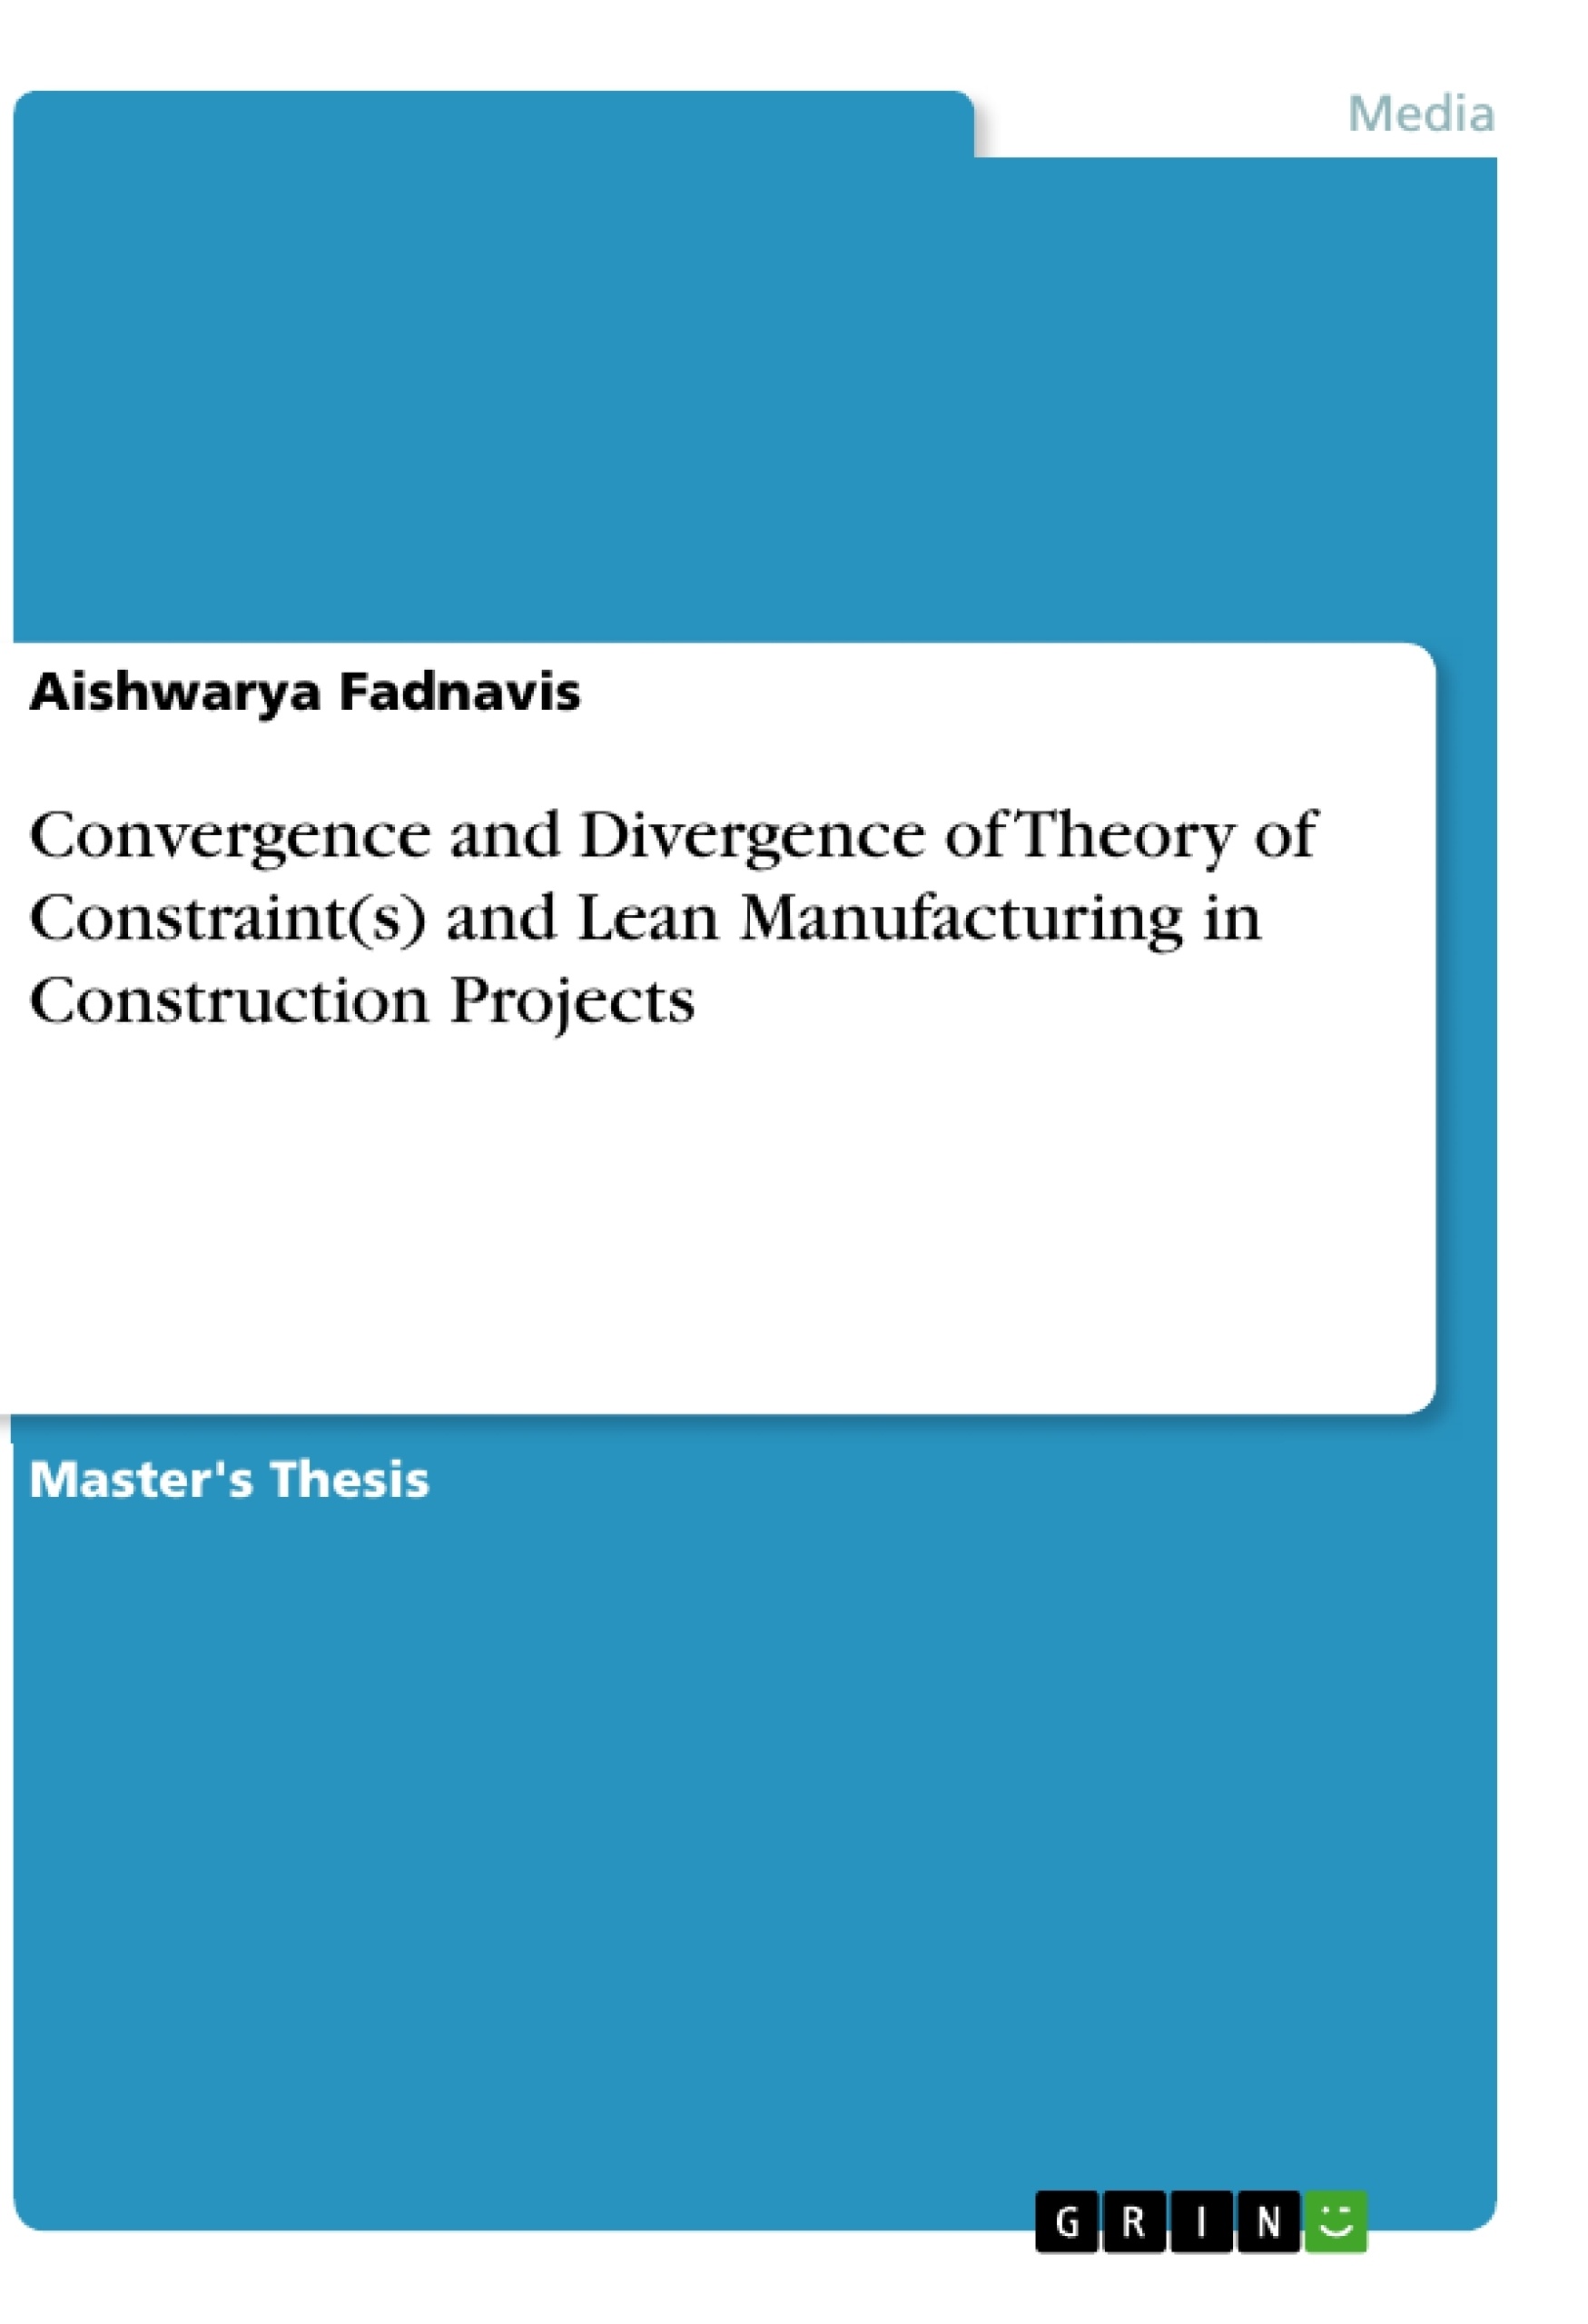 Título: Convergence and Divergence of Theory of Constraint(s) and Lean Manufacturing in Construction Projects